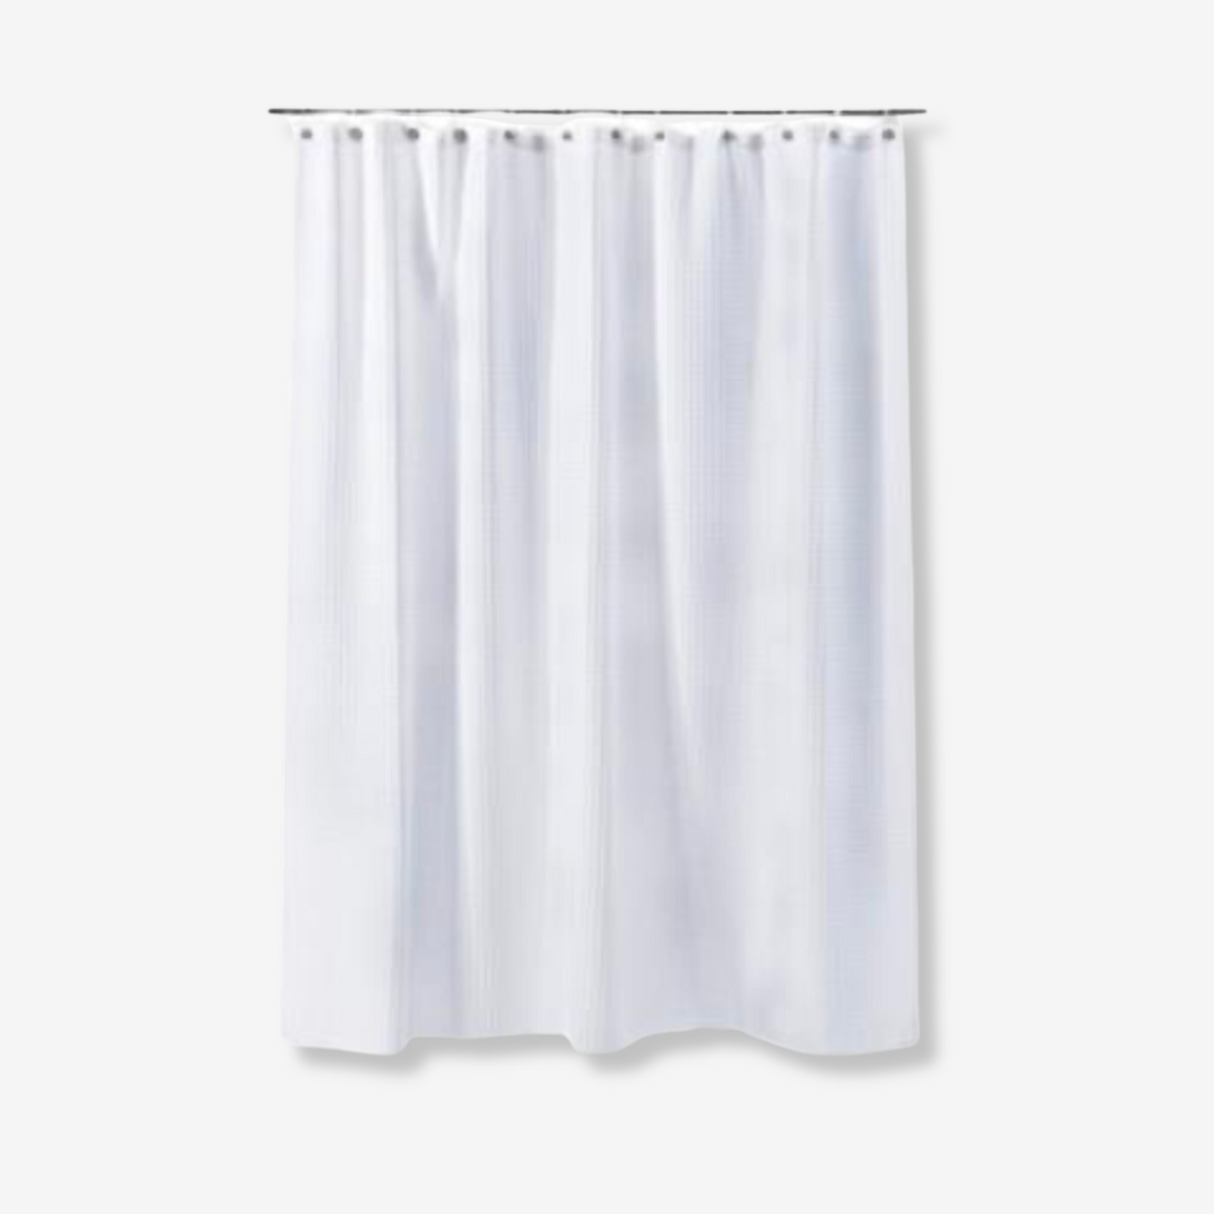 White waffled shower curtain on a white background